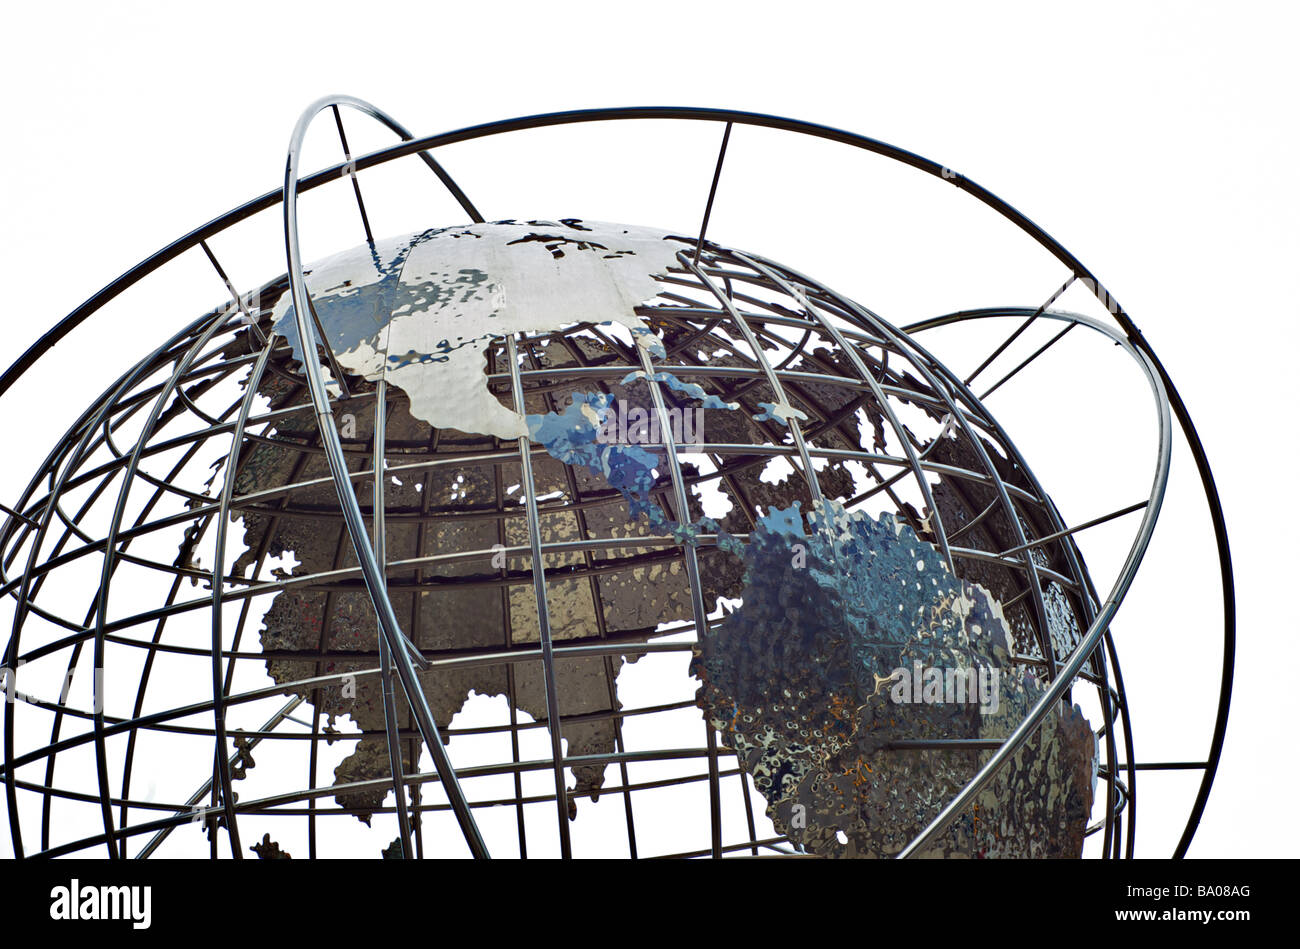 Globe Sculpture at Trump International Hotel and Tower, located on 59th St.and Columbus Circle in NYC (For Editorial Use Only) Stock Photo